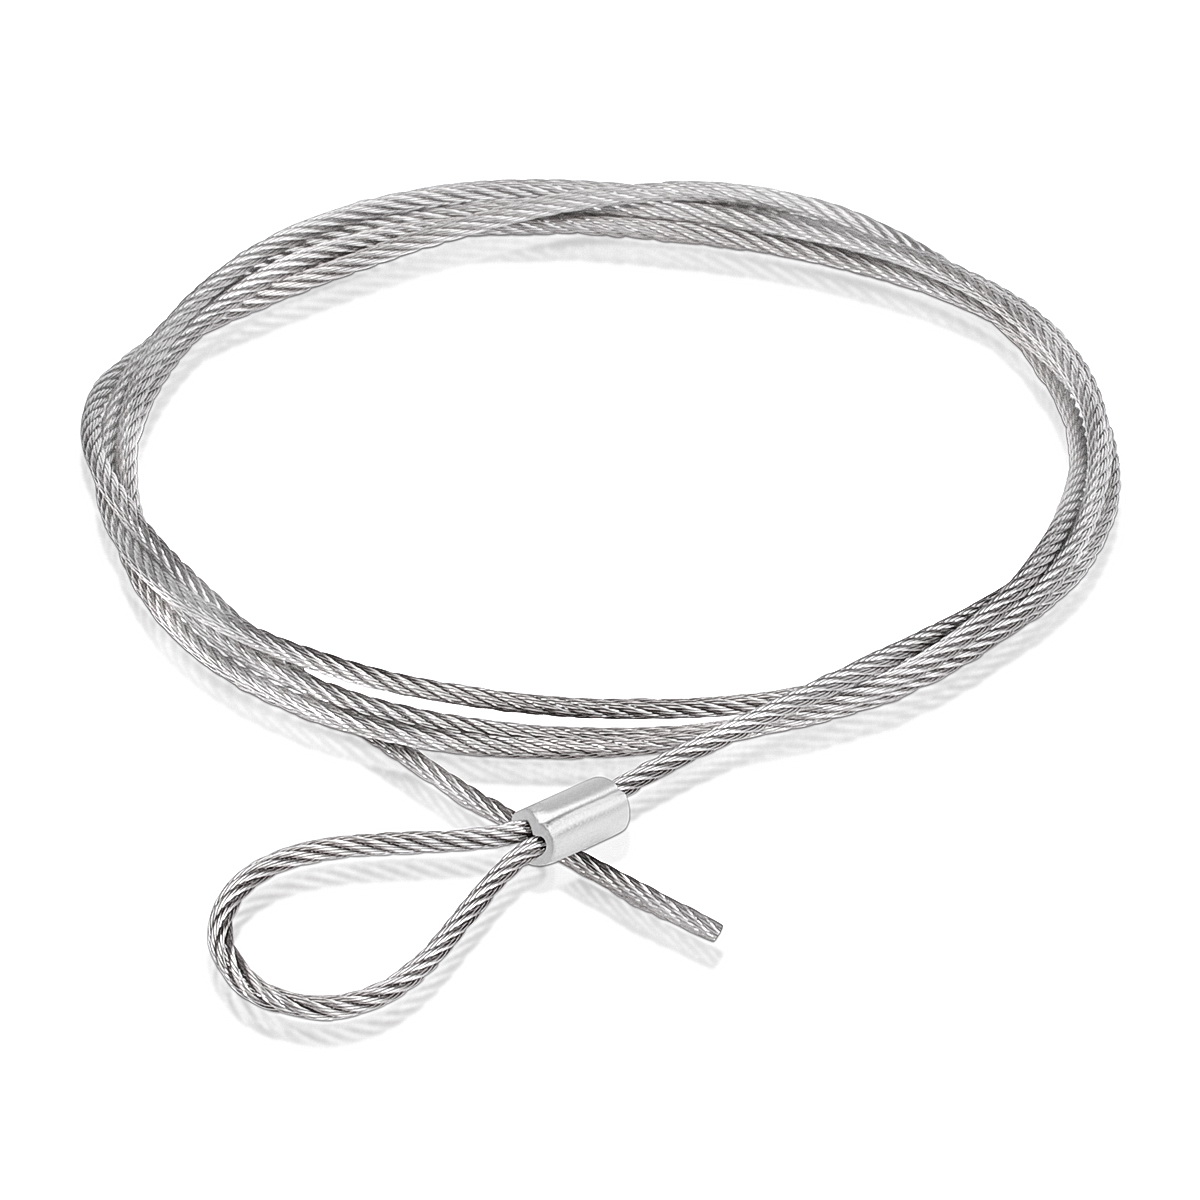 Looped Stainless Steel Cable - 96''